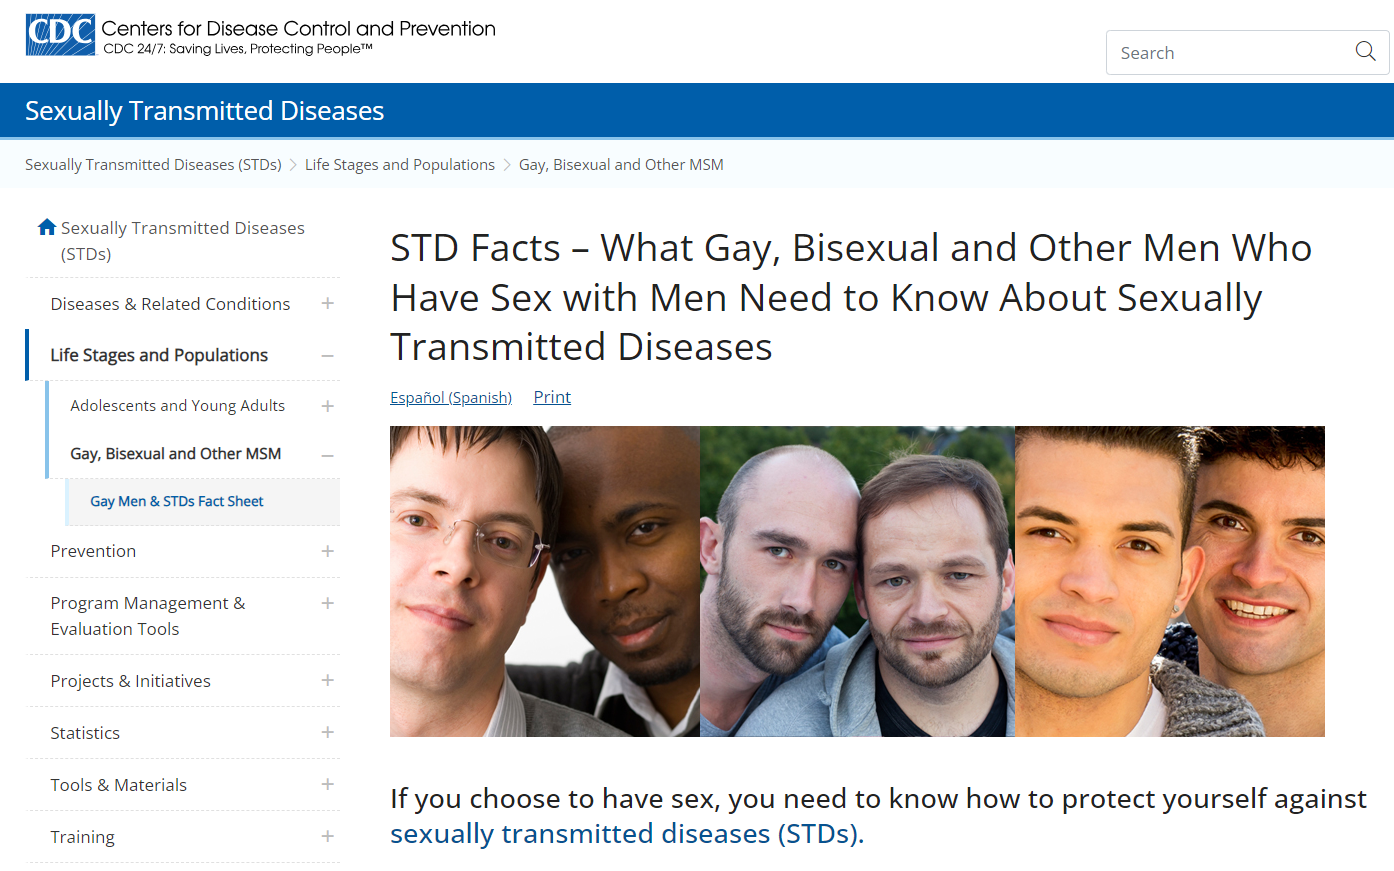 Screenshot of CDC webpage for STD facts. The image shows multicultural men.